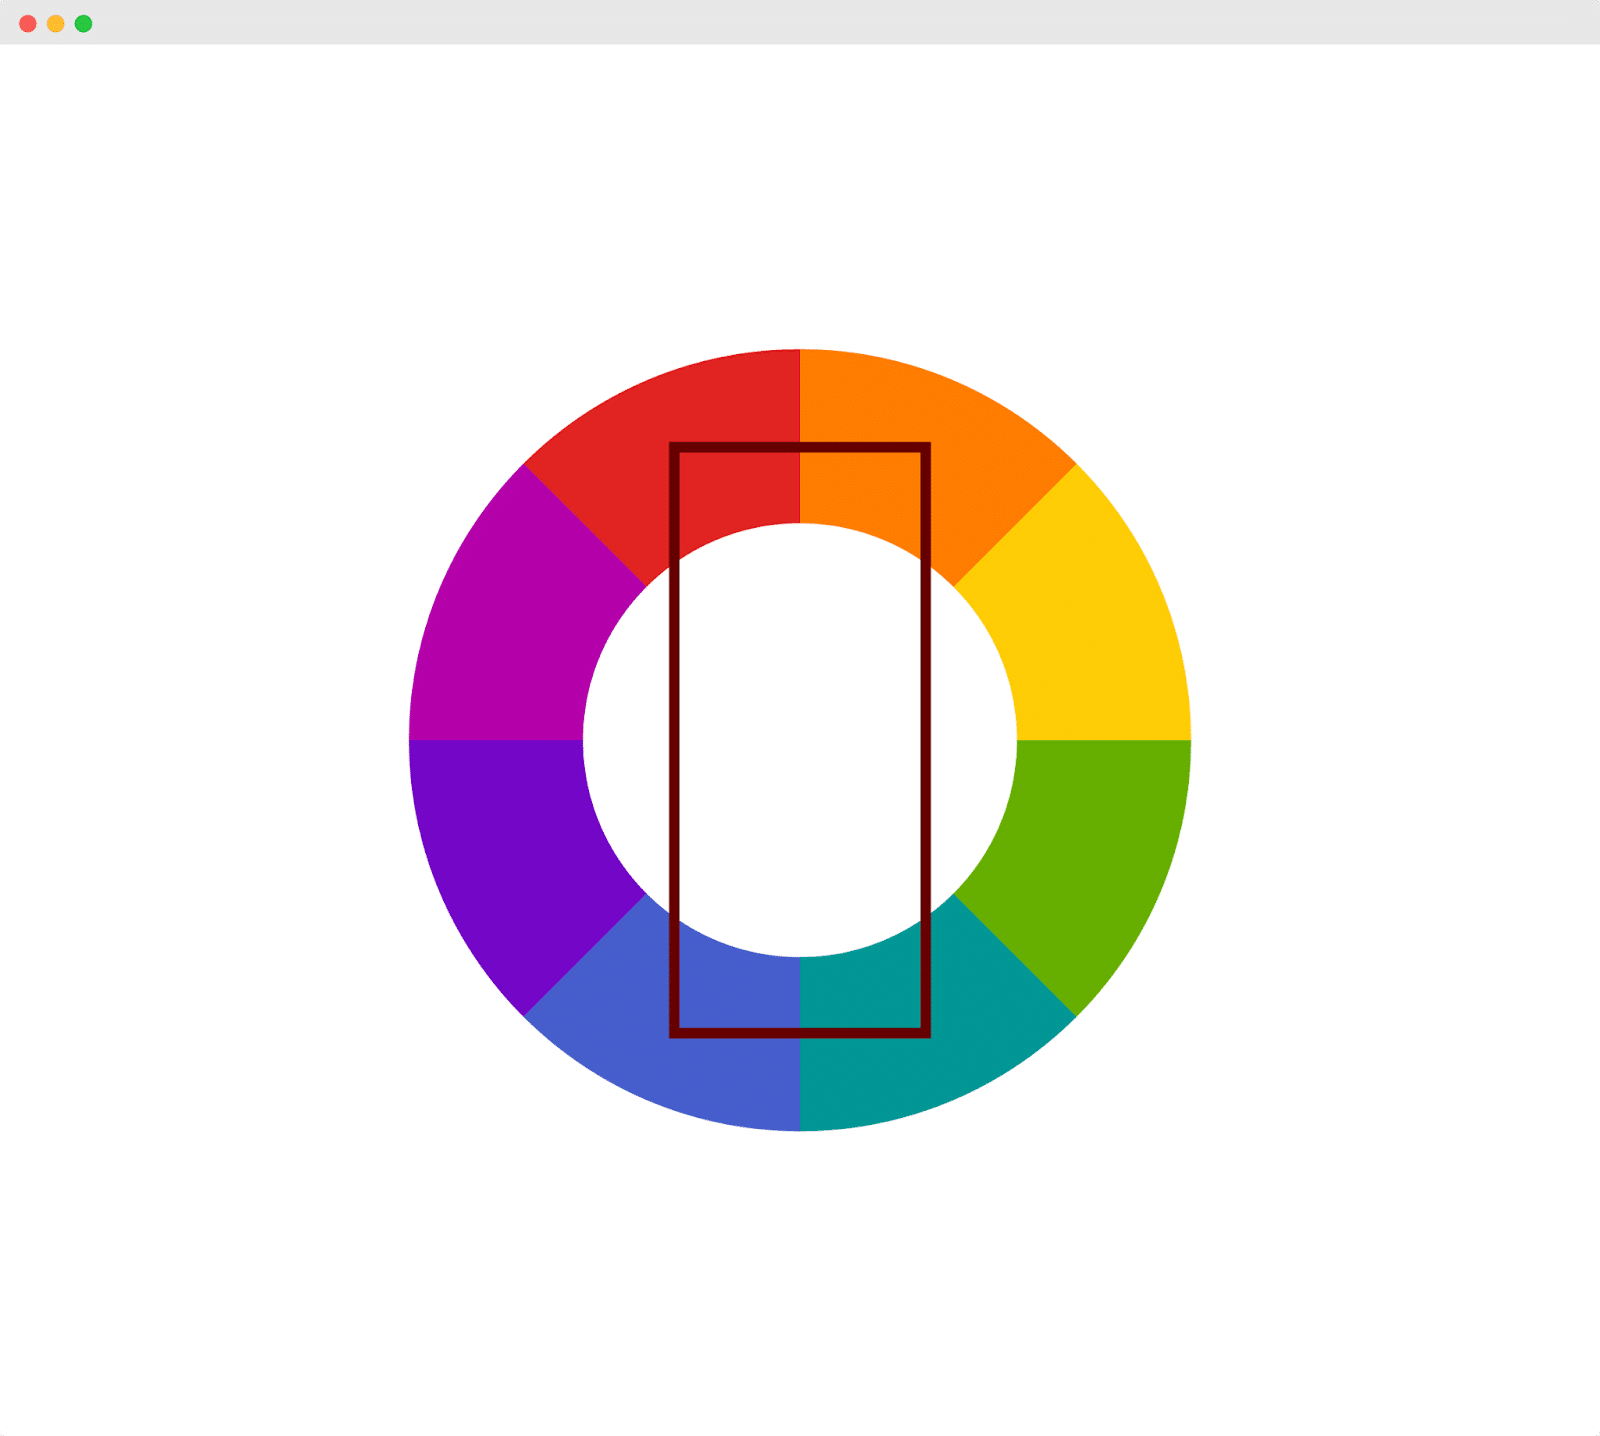  Understanding Color Theory On Design